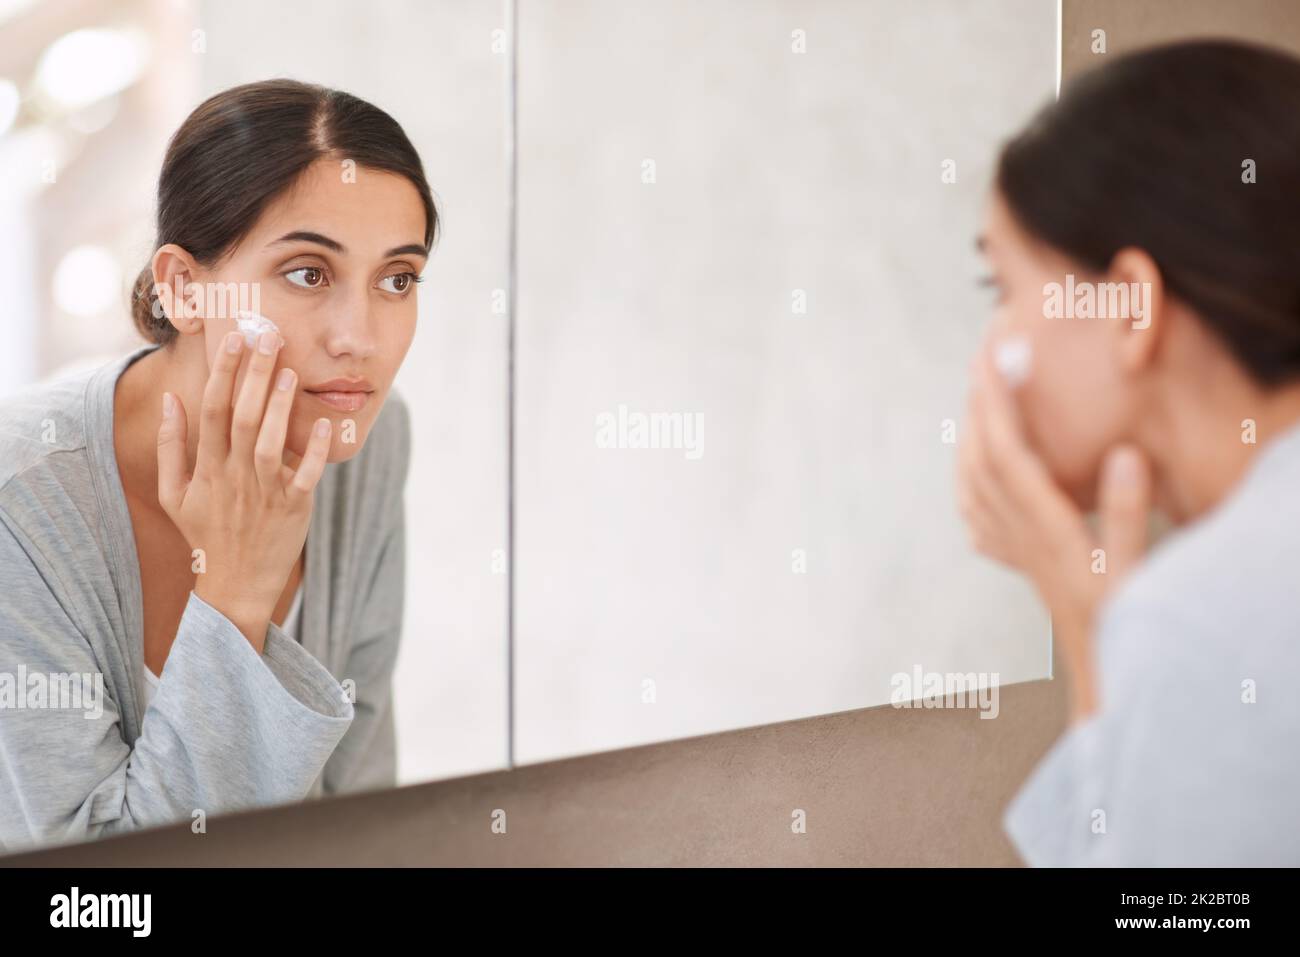 Taking good care of her skin. Shot of a beautiful woman applying moisturizer to her face. Stock Photo